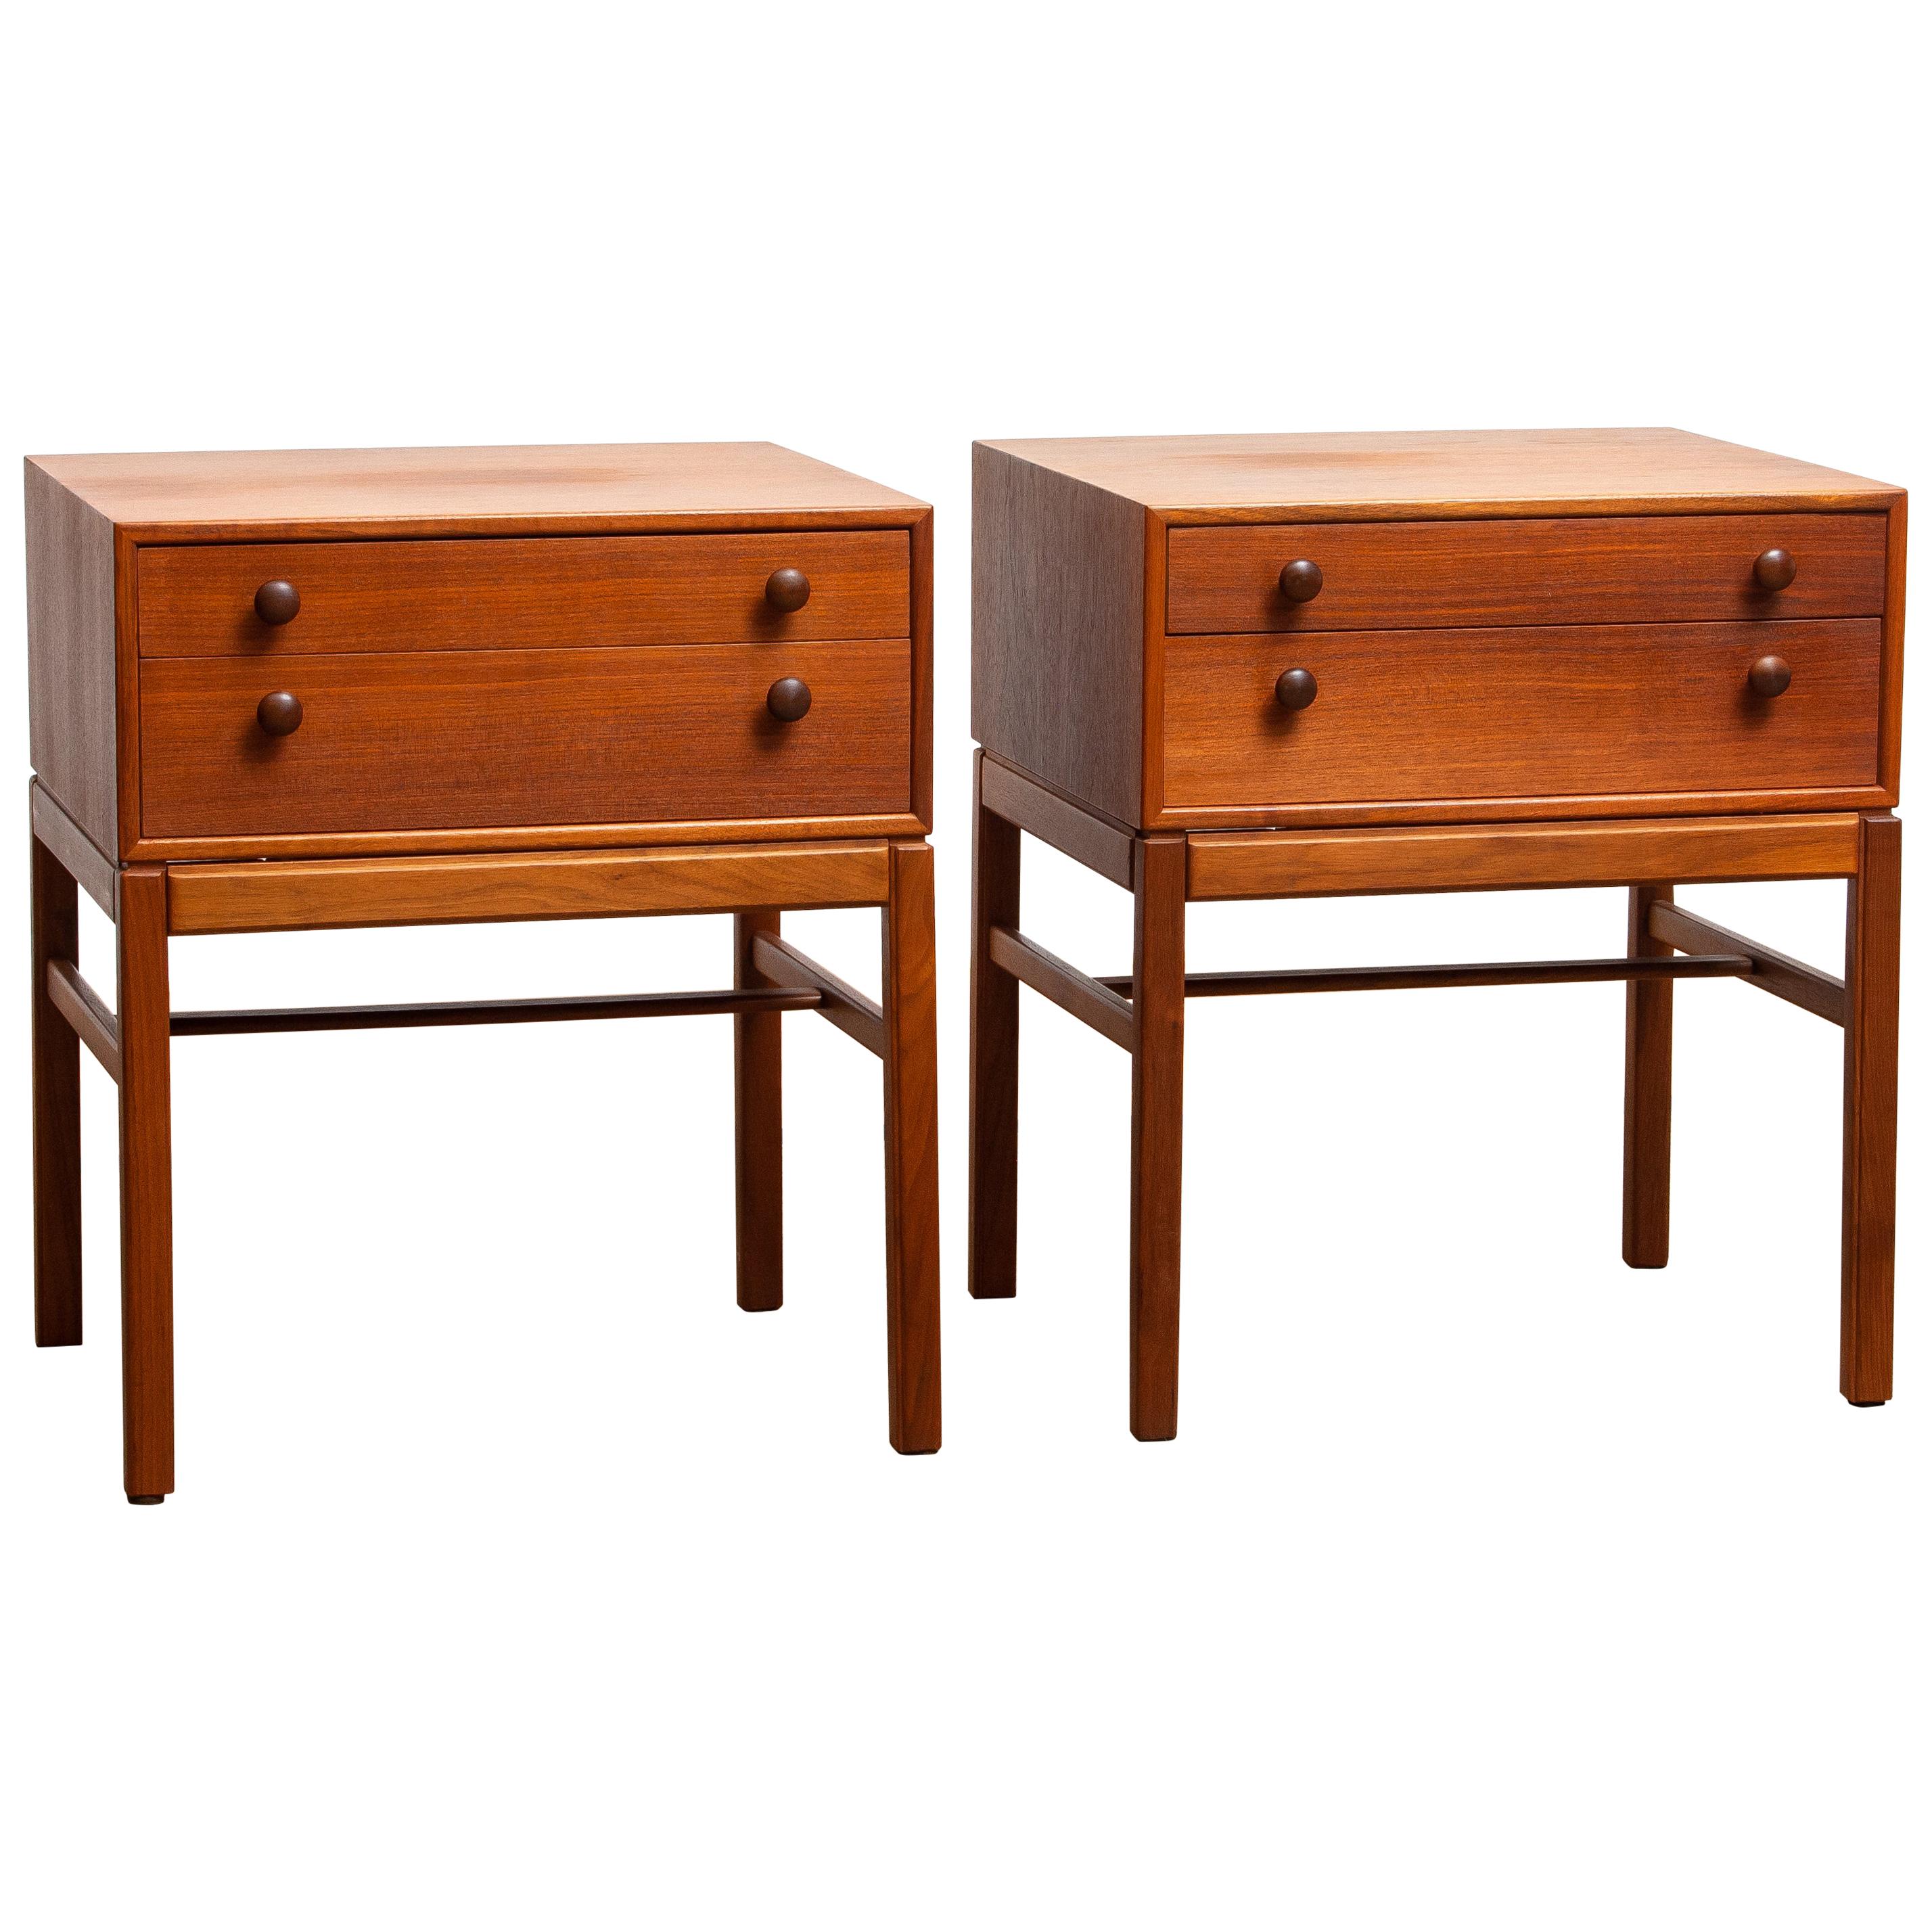 Beautiful set of two teak nightstands, side tables designed by Sven Engström & Gunnar Myrstrand for Tingström Möbelfabriks, Sweden.
They are from the flexible 'Casino' collection.
You can lift the top with the two drawers from the stand.
They are